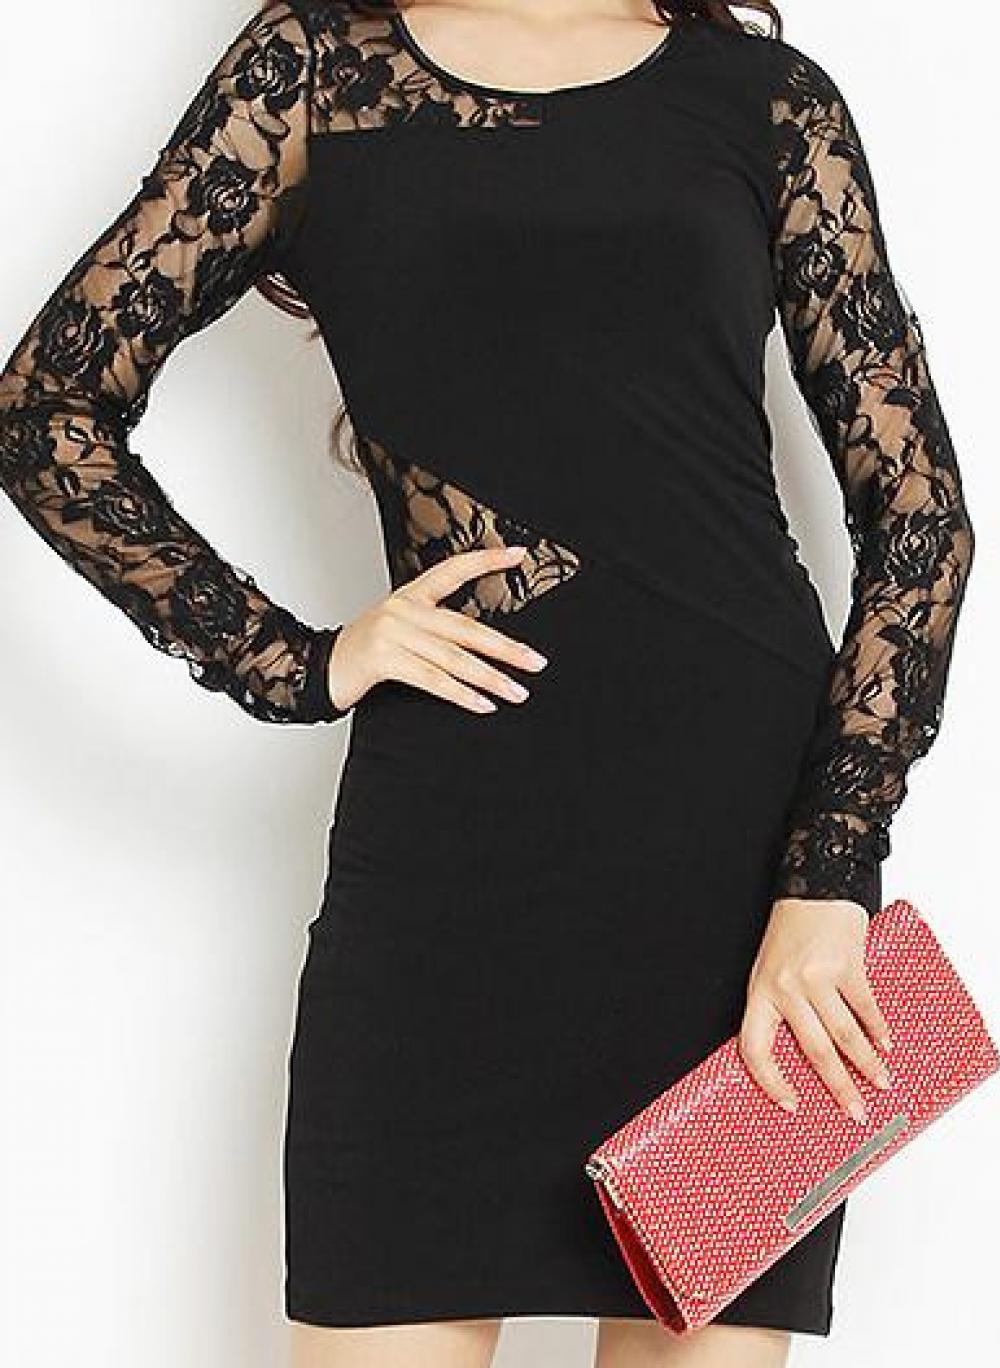 Long Sleeve Lace Cut Out Dress